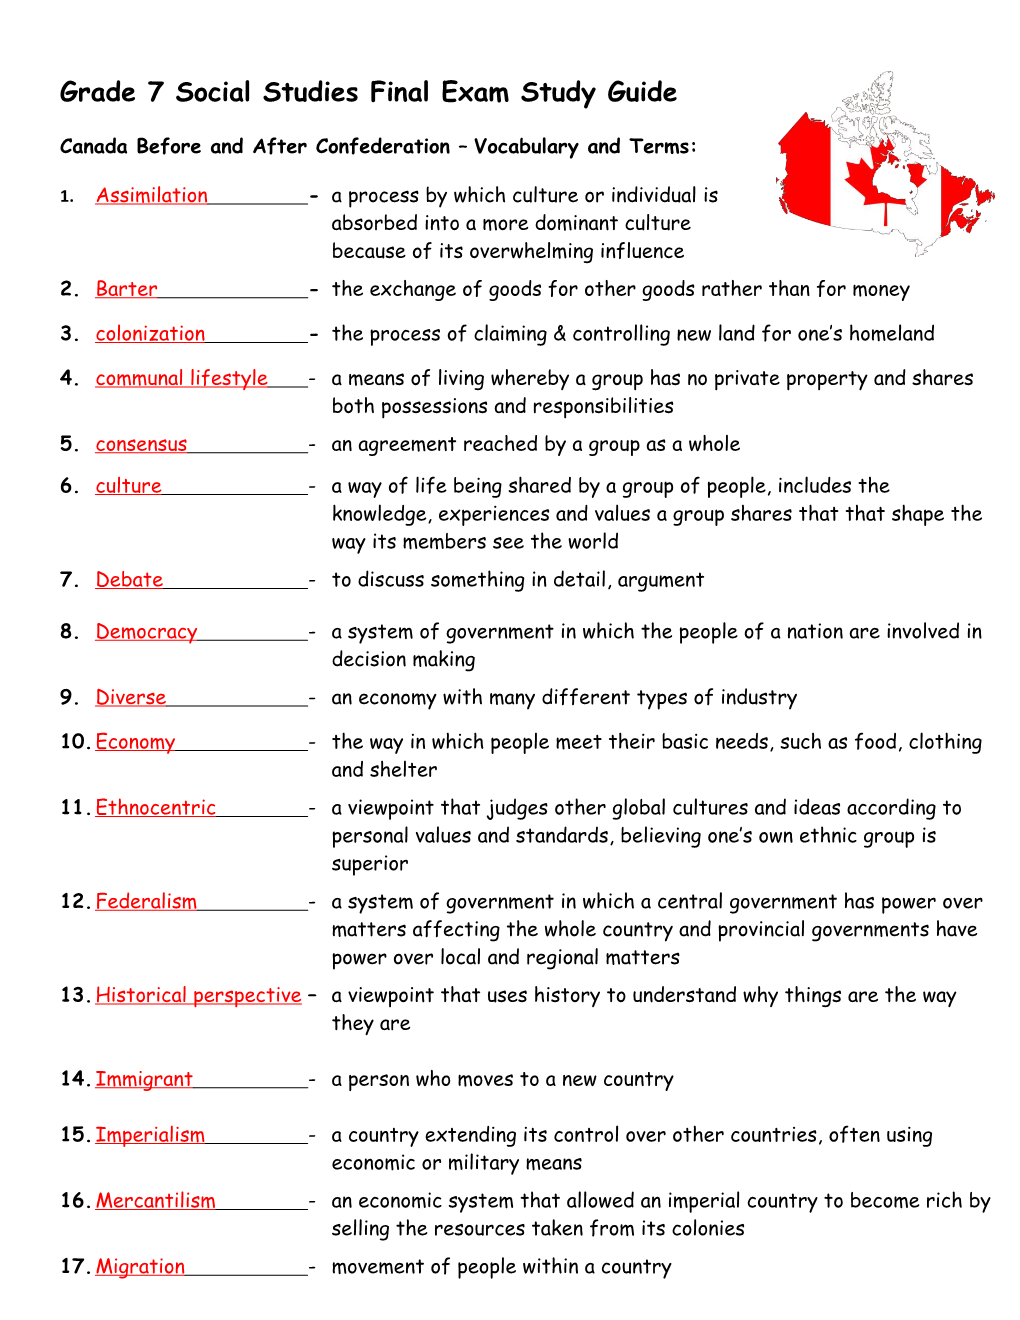 Canada Before and After Confederation Vocabulary and Terms